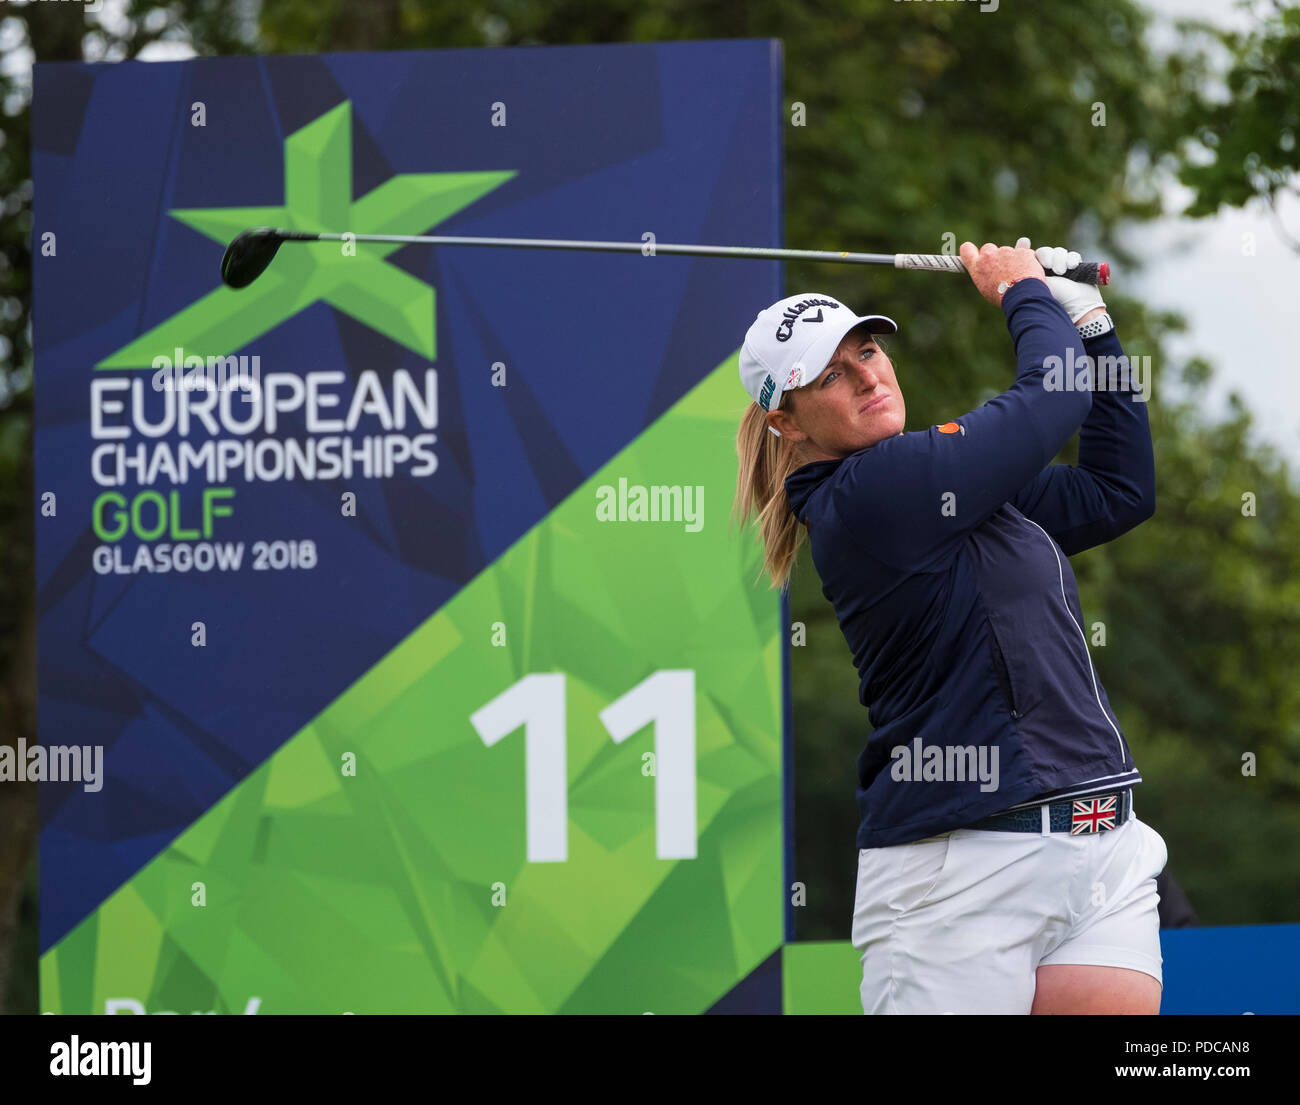 Gleneagles, Scotland, UK; 8 August, 2018.  European Championships 2018. Day one of golf competition at Gleneagles..Men's and Women's Team Championships Round Robin Group Stage - 1st Round. Four Ball Match Play format. Match 13 Great Britain 2 v Sweden 1 Ladies. Catriona Matthew and Holly Clyburn won 3 and 2. Holly Clyburn  tees off on the 11th hole Credit: Iain Masterton/Alamy Live News Stock Photo